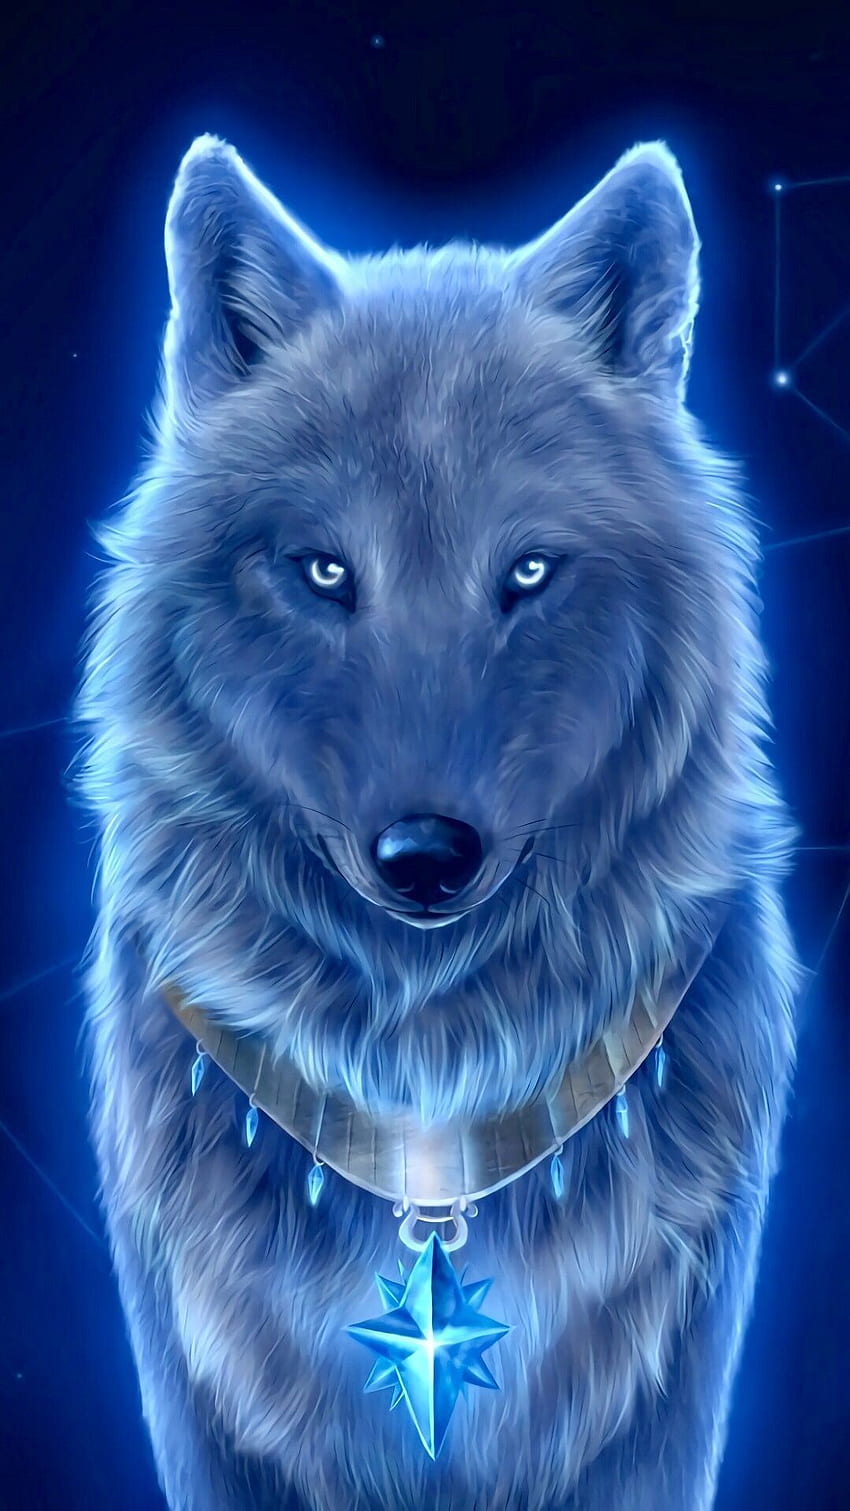 Large Wolf Wallpapers 3d Download Wallpaper 3d Background Wallpaper Wolf  Pictures Background Image And Wallpaper for Free Download